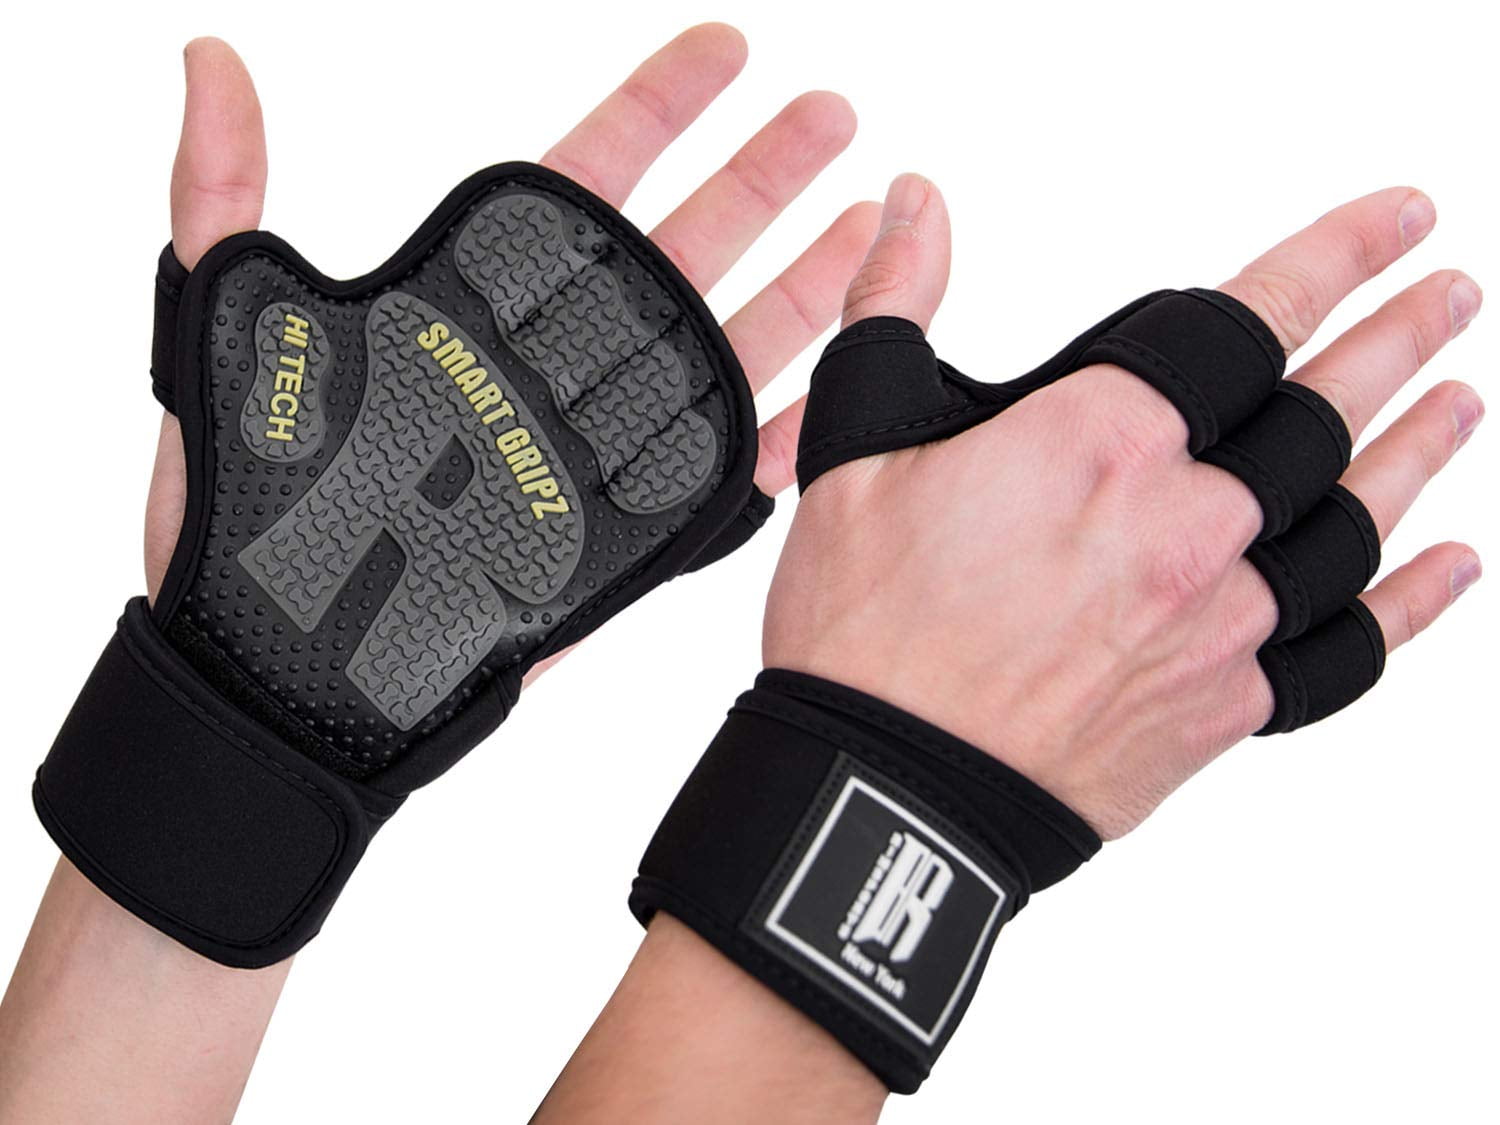 Tecbro Ventilated Weight Lifting Gym Gloves Built-in Wrist Wraps Multi-Purpose 